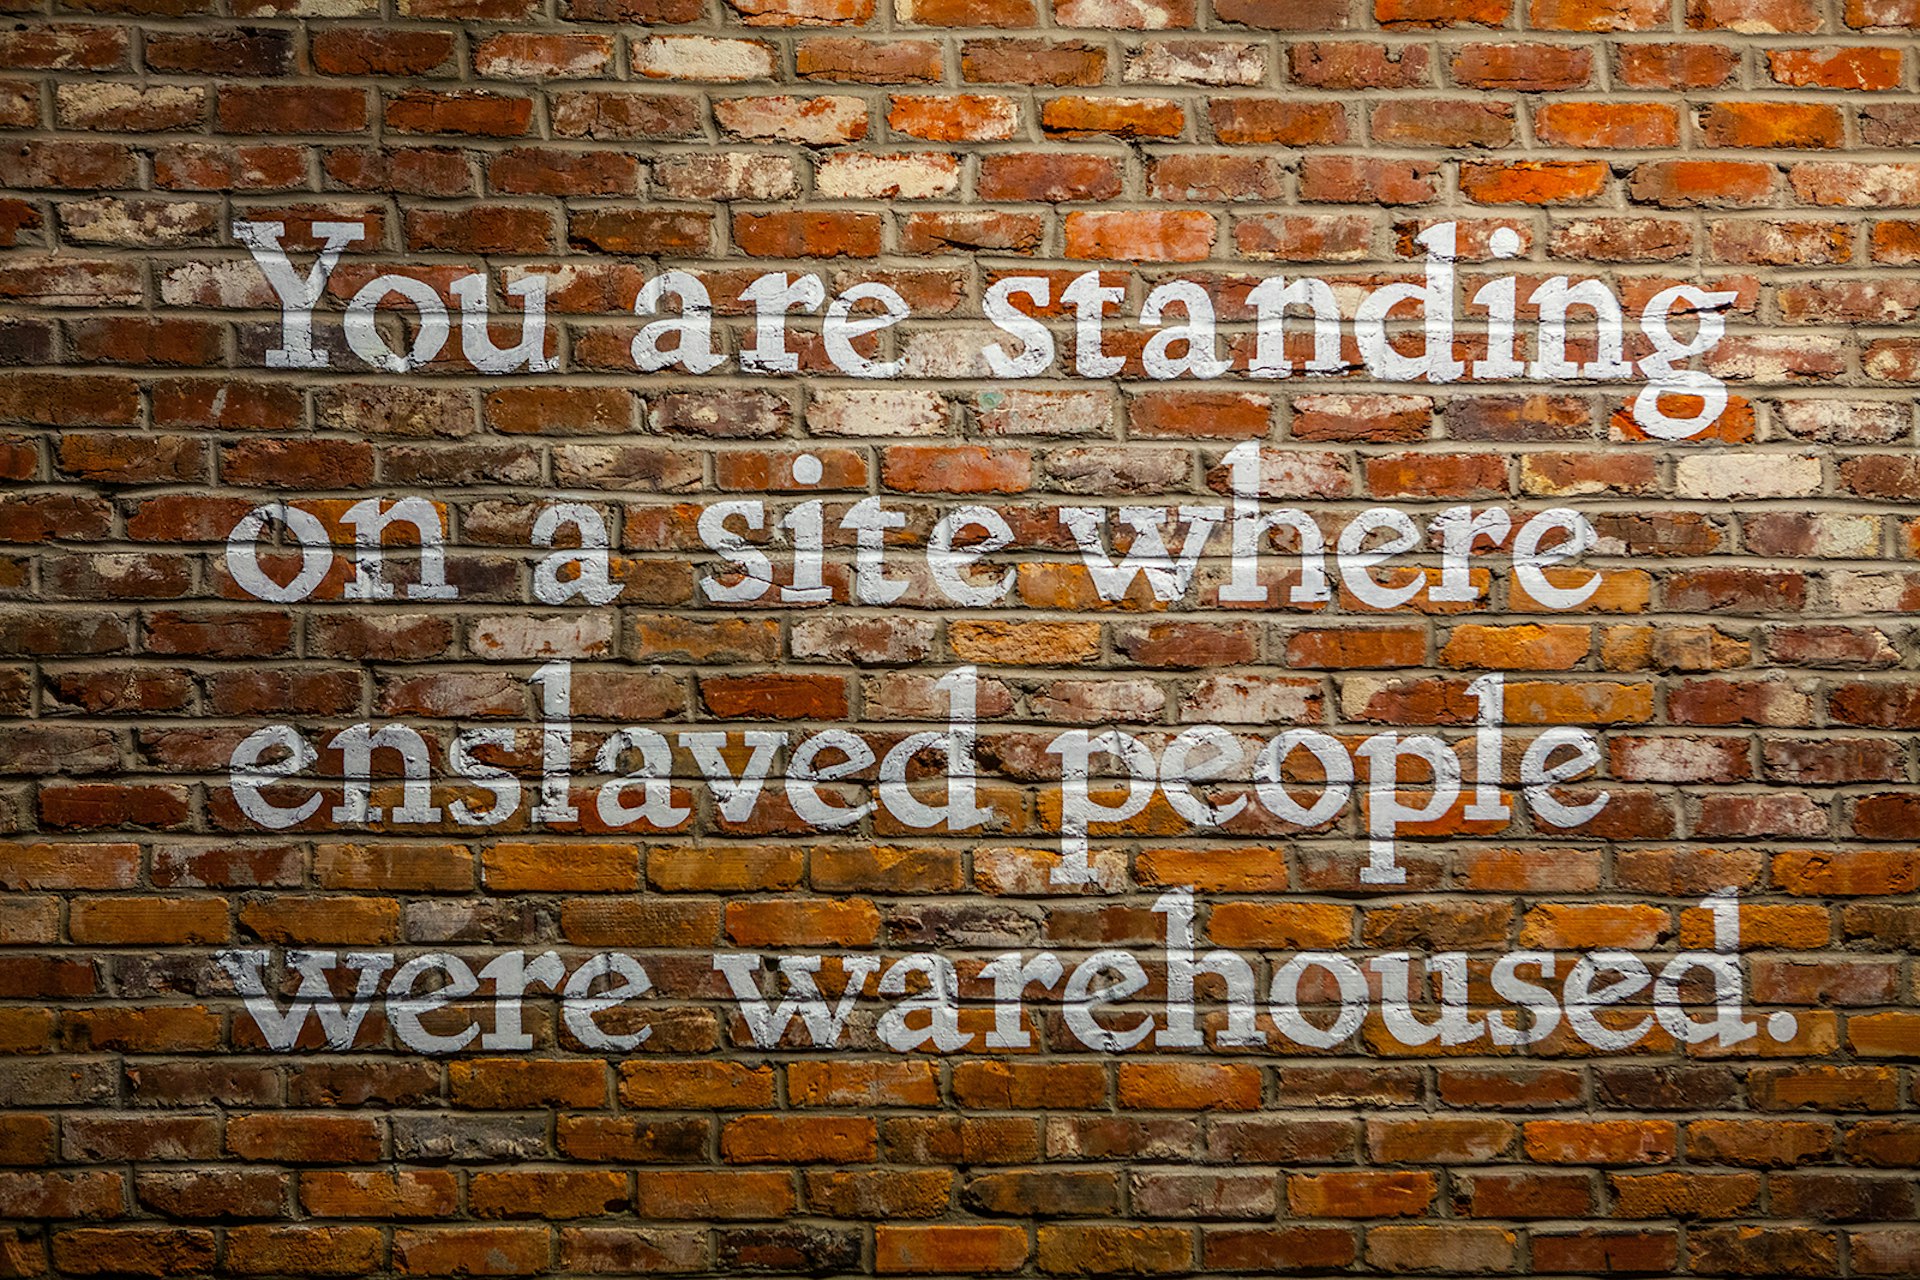 The words 'You are standing on a site where enslaved people were warehoused' is painted in white on a brick wall © Equal Justice Initiative / Human Pictures